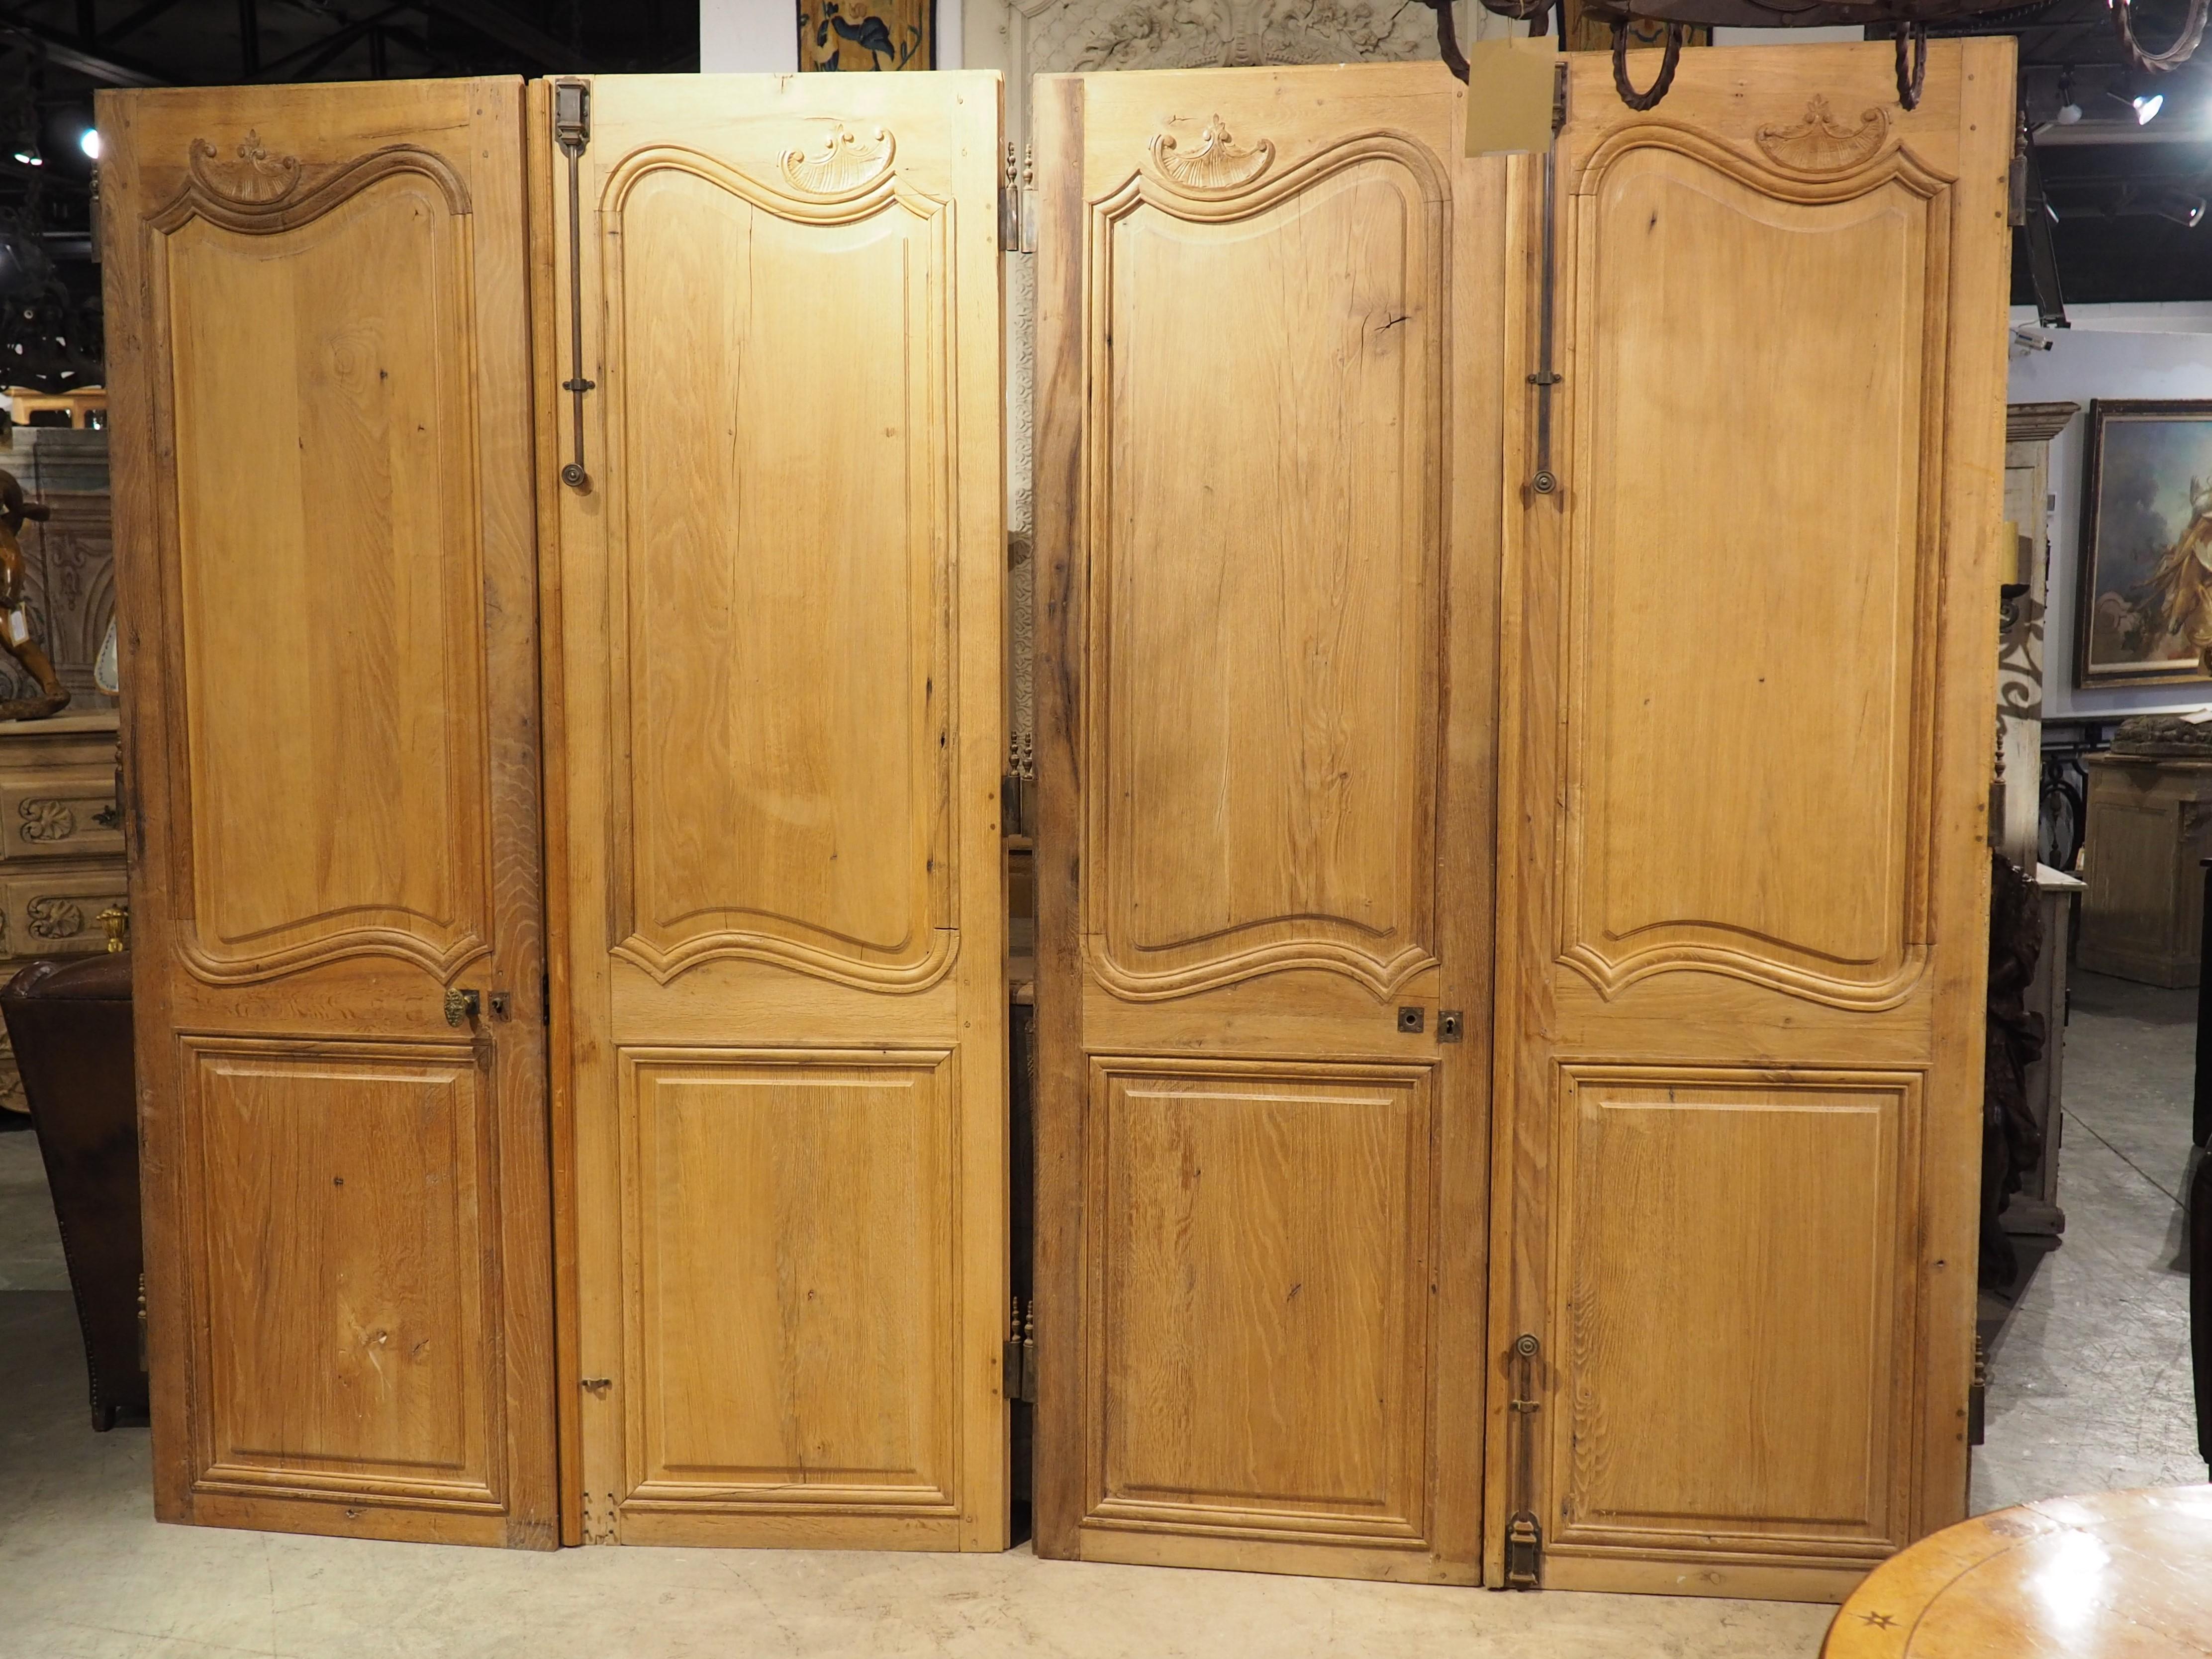 Set of 4 Antique French Carved Oak Double Sided Interior Doors, 19th Century For Sale 14